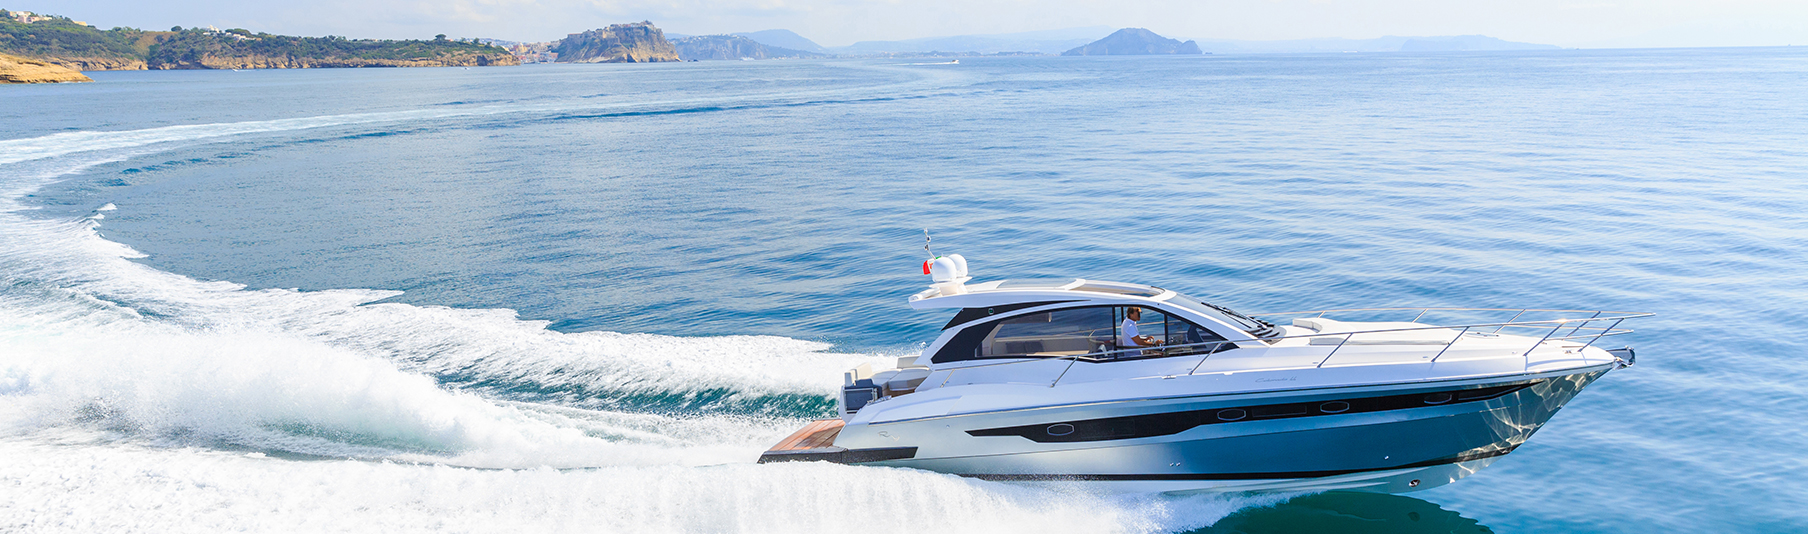 High Net Worth Insurance: A man driving a luxury speed boat across the sea